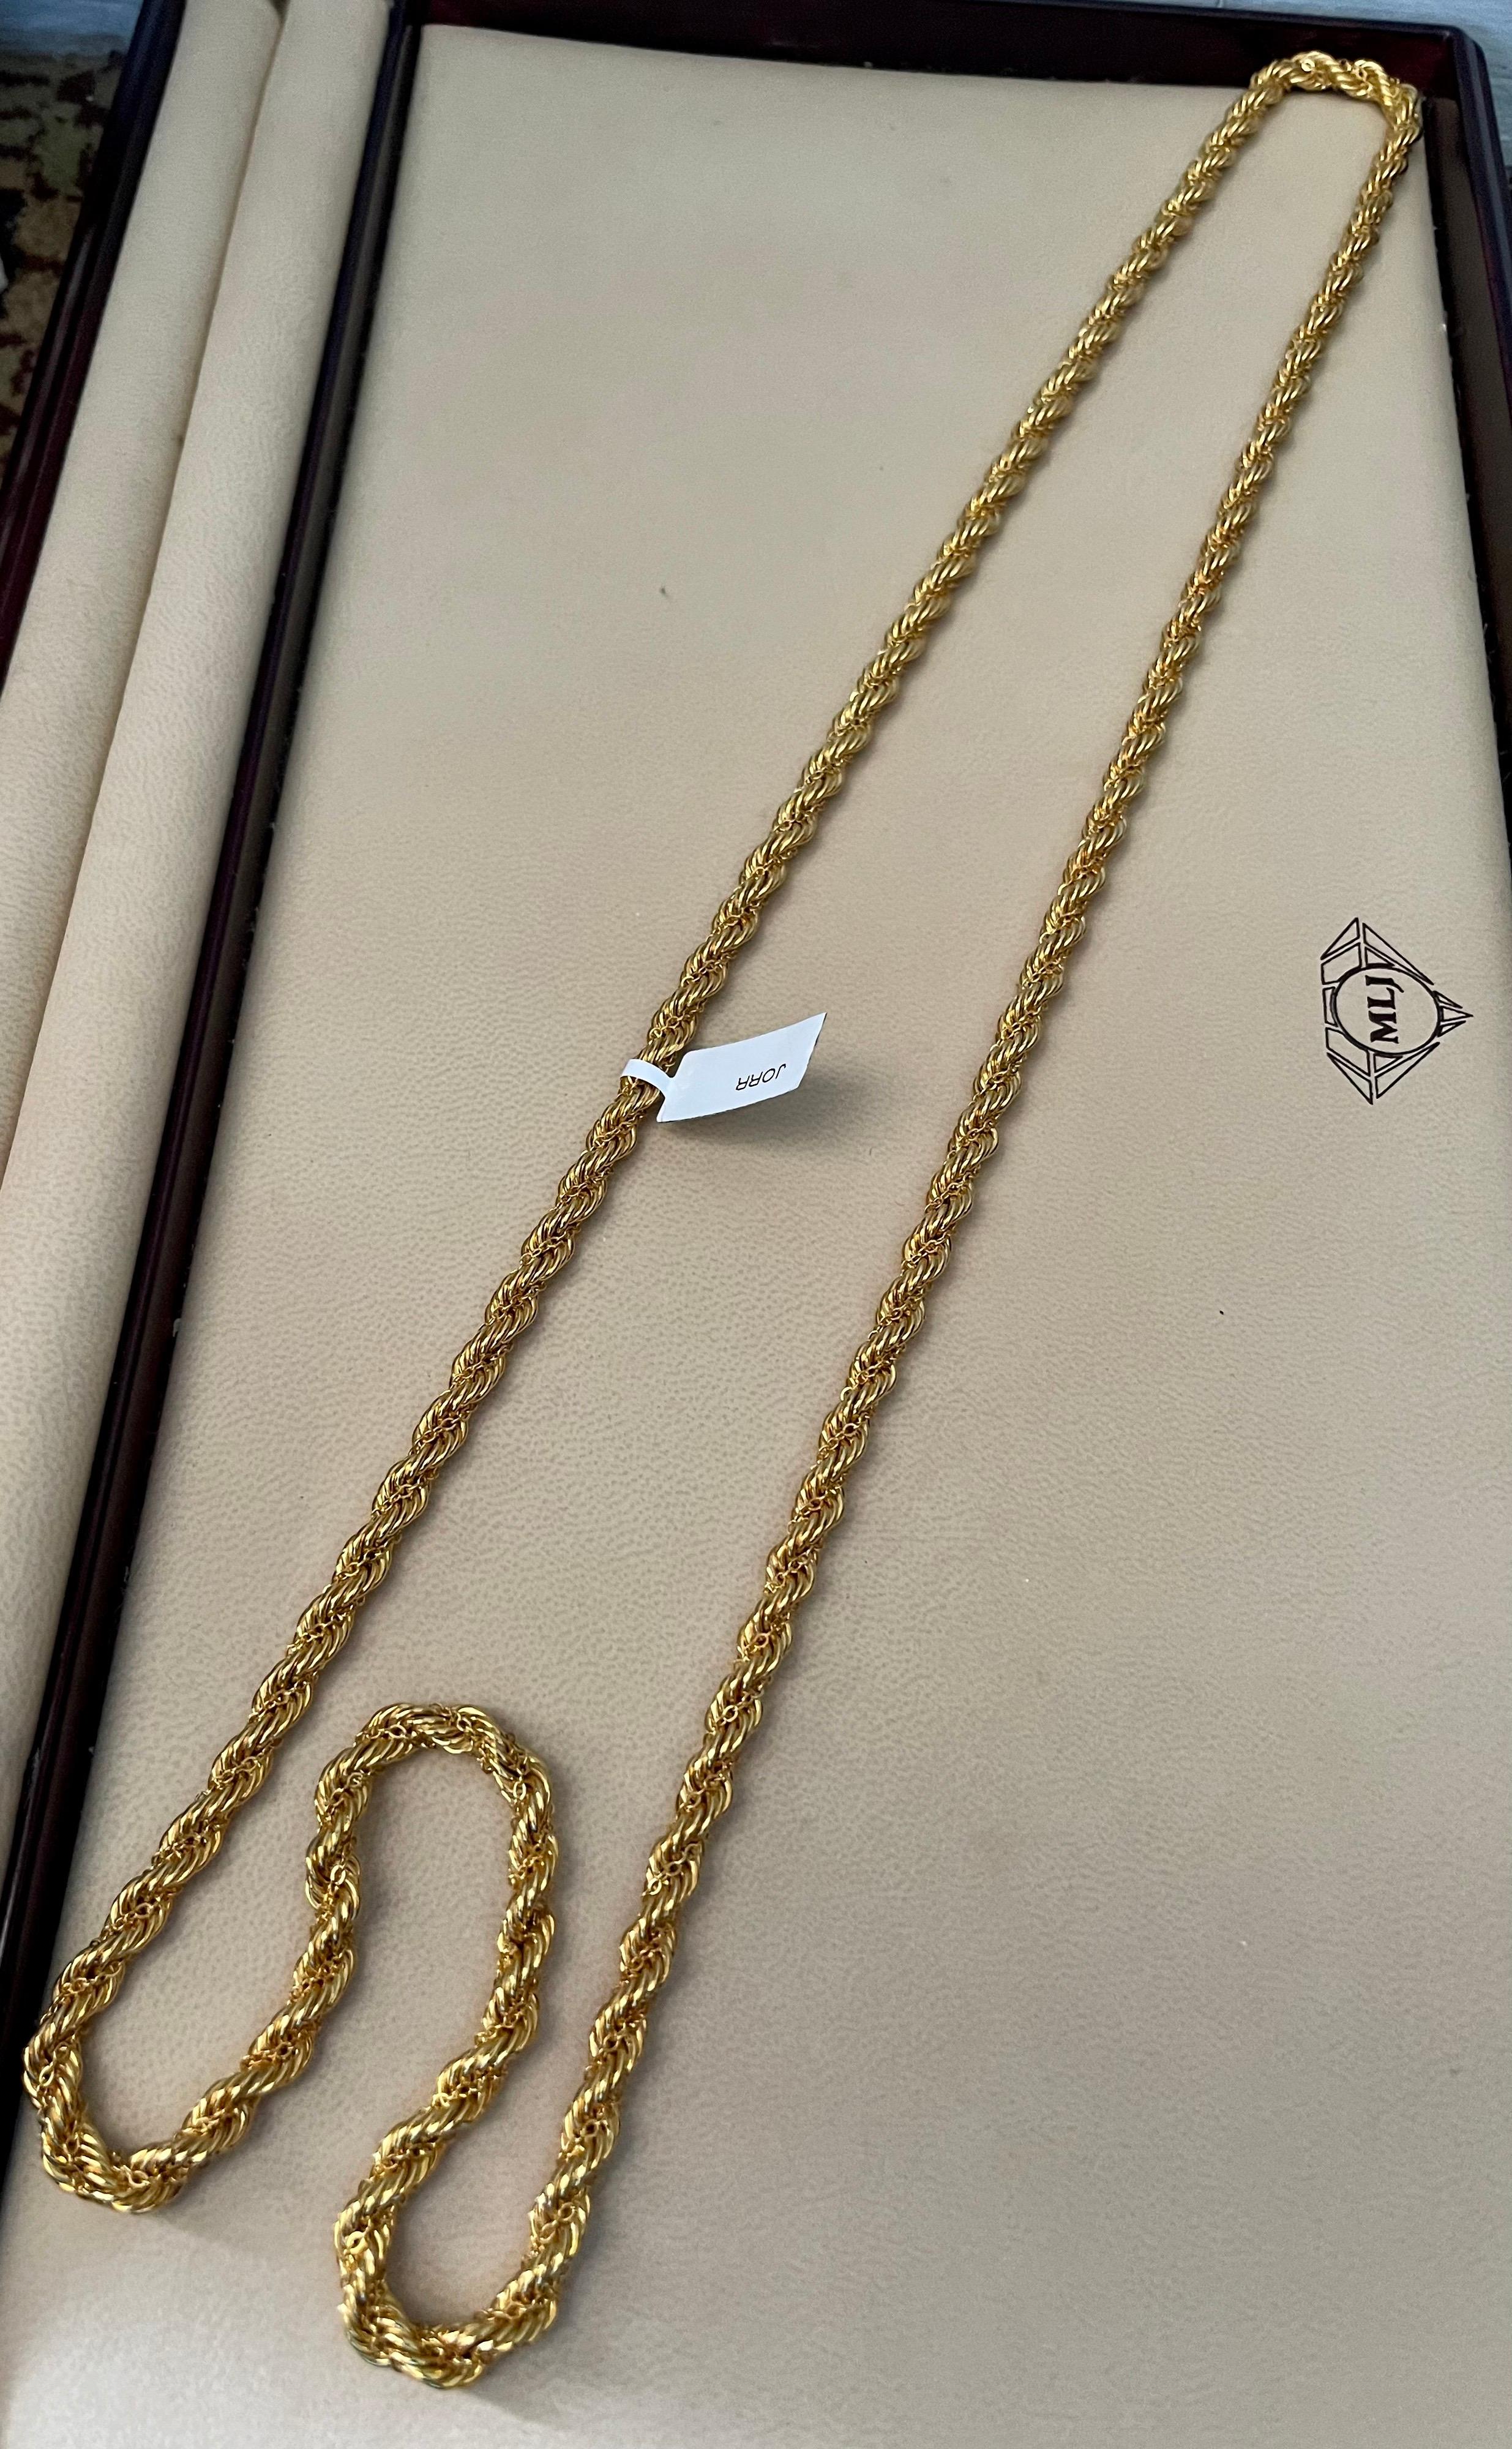 Vintage 14 Karat Yellow Gold 36 Gm Rope Chain, Long, Opera Length In Excellent Condition For Sale In New York, NY